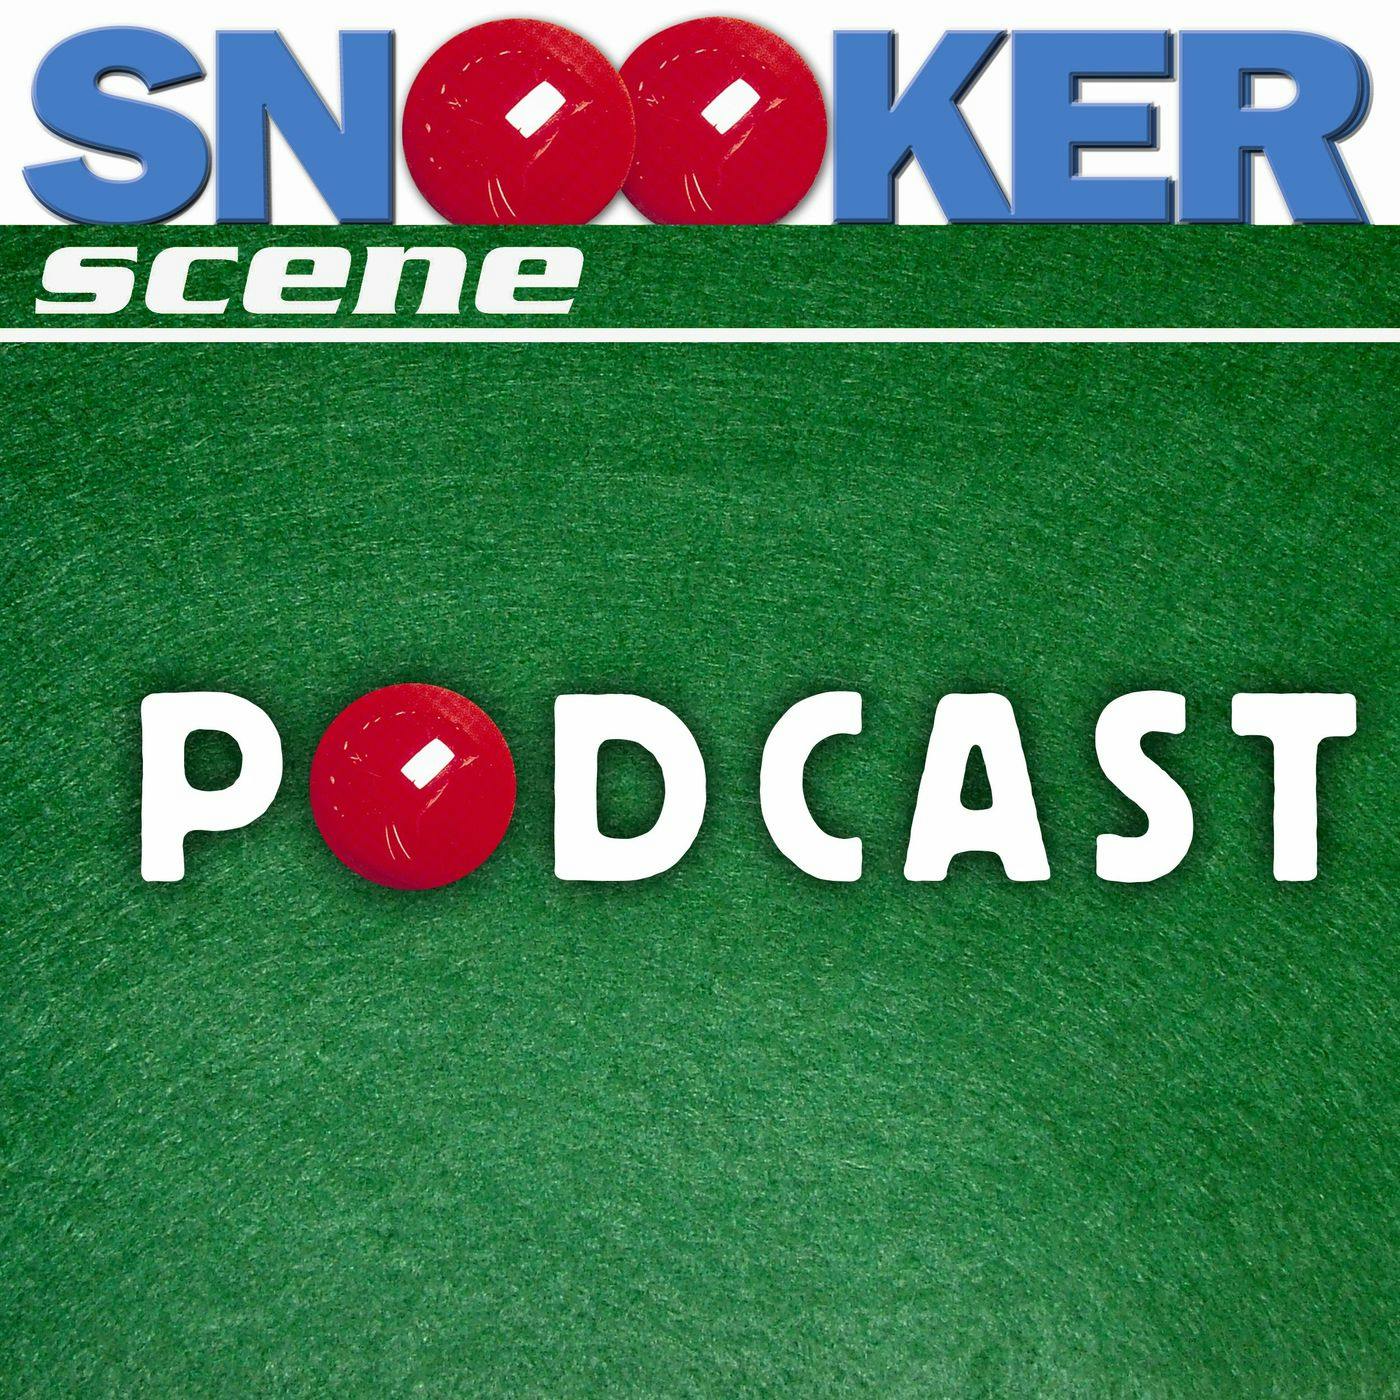 Snooker Scene Podcast episode 186 - Review of the Year